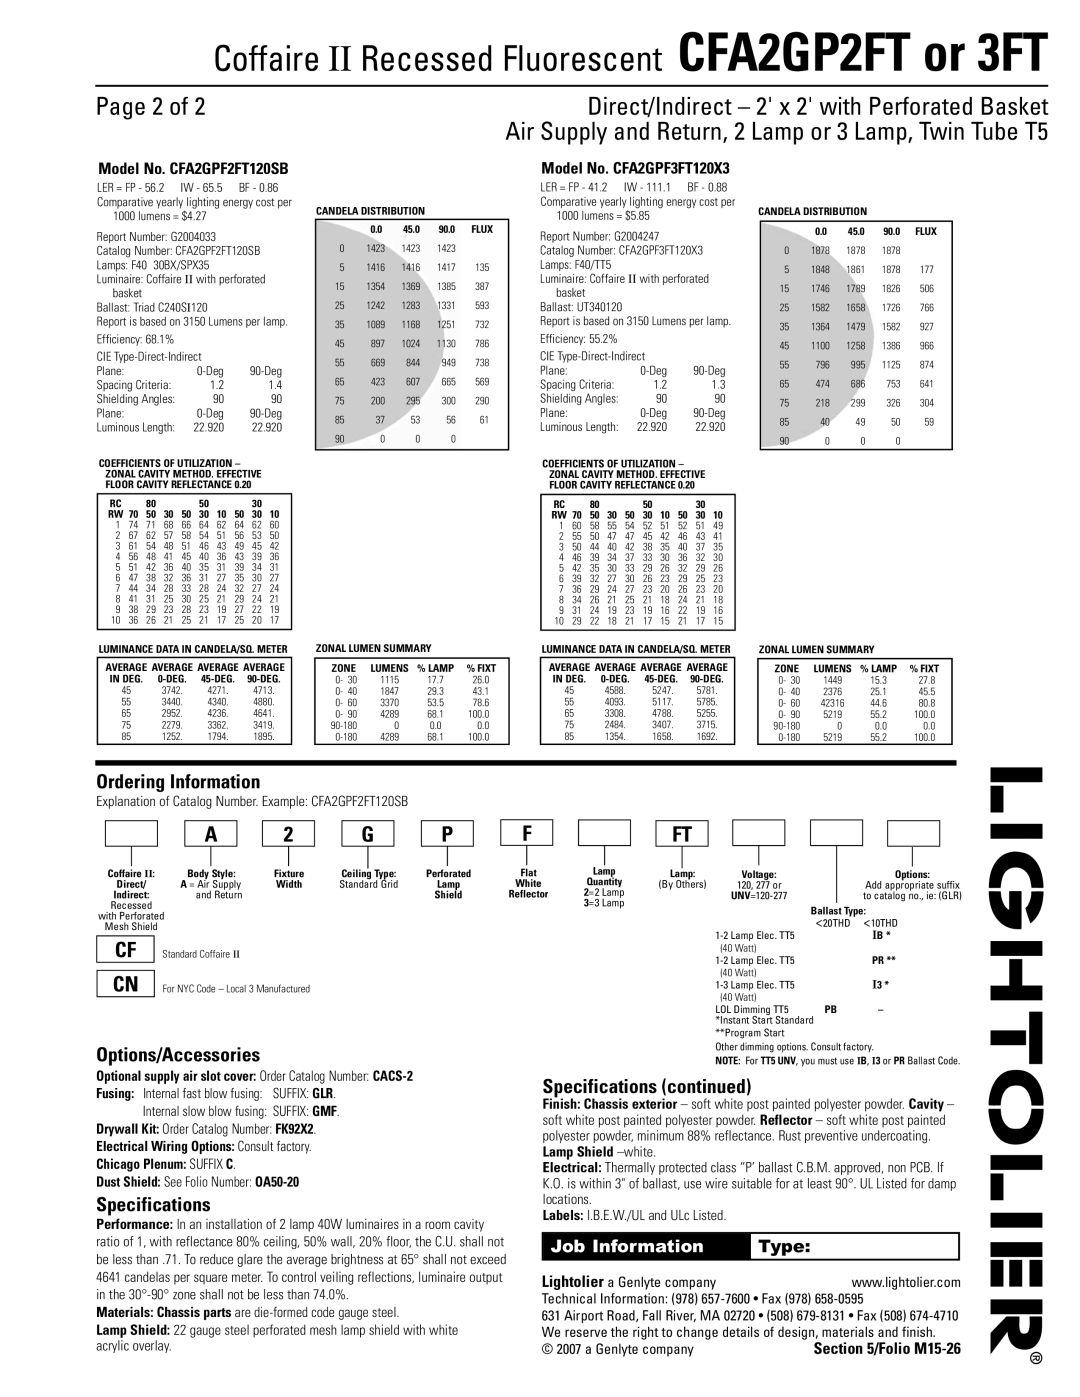 Lightolier CFA2GPF2FT Page 2 of, Direct/Indirect - 2 x 2 with Perforated Basket, Ordering Information, Options/Accessories 